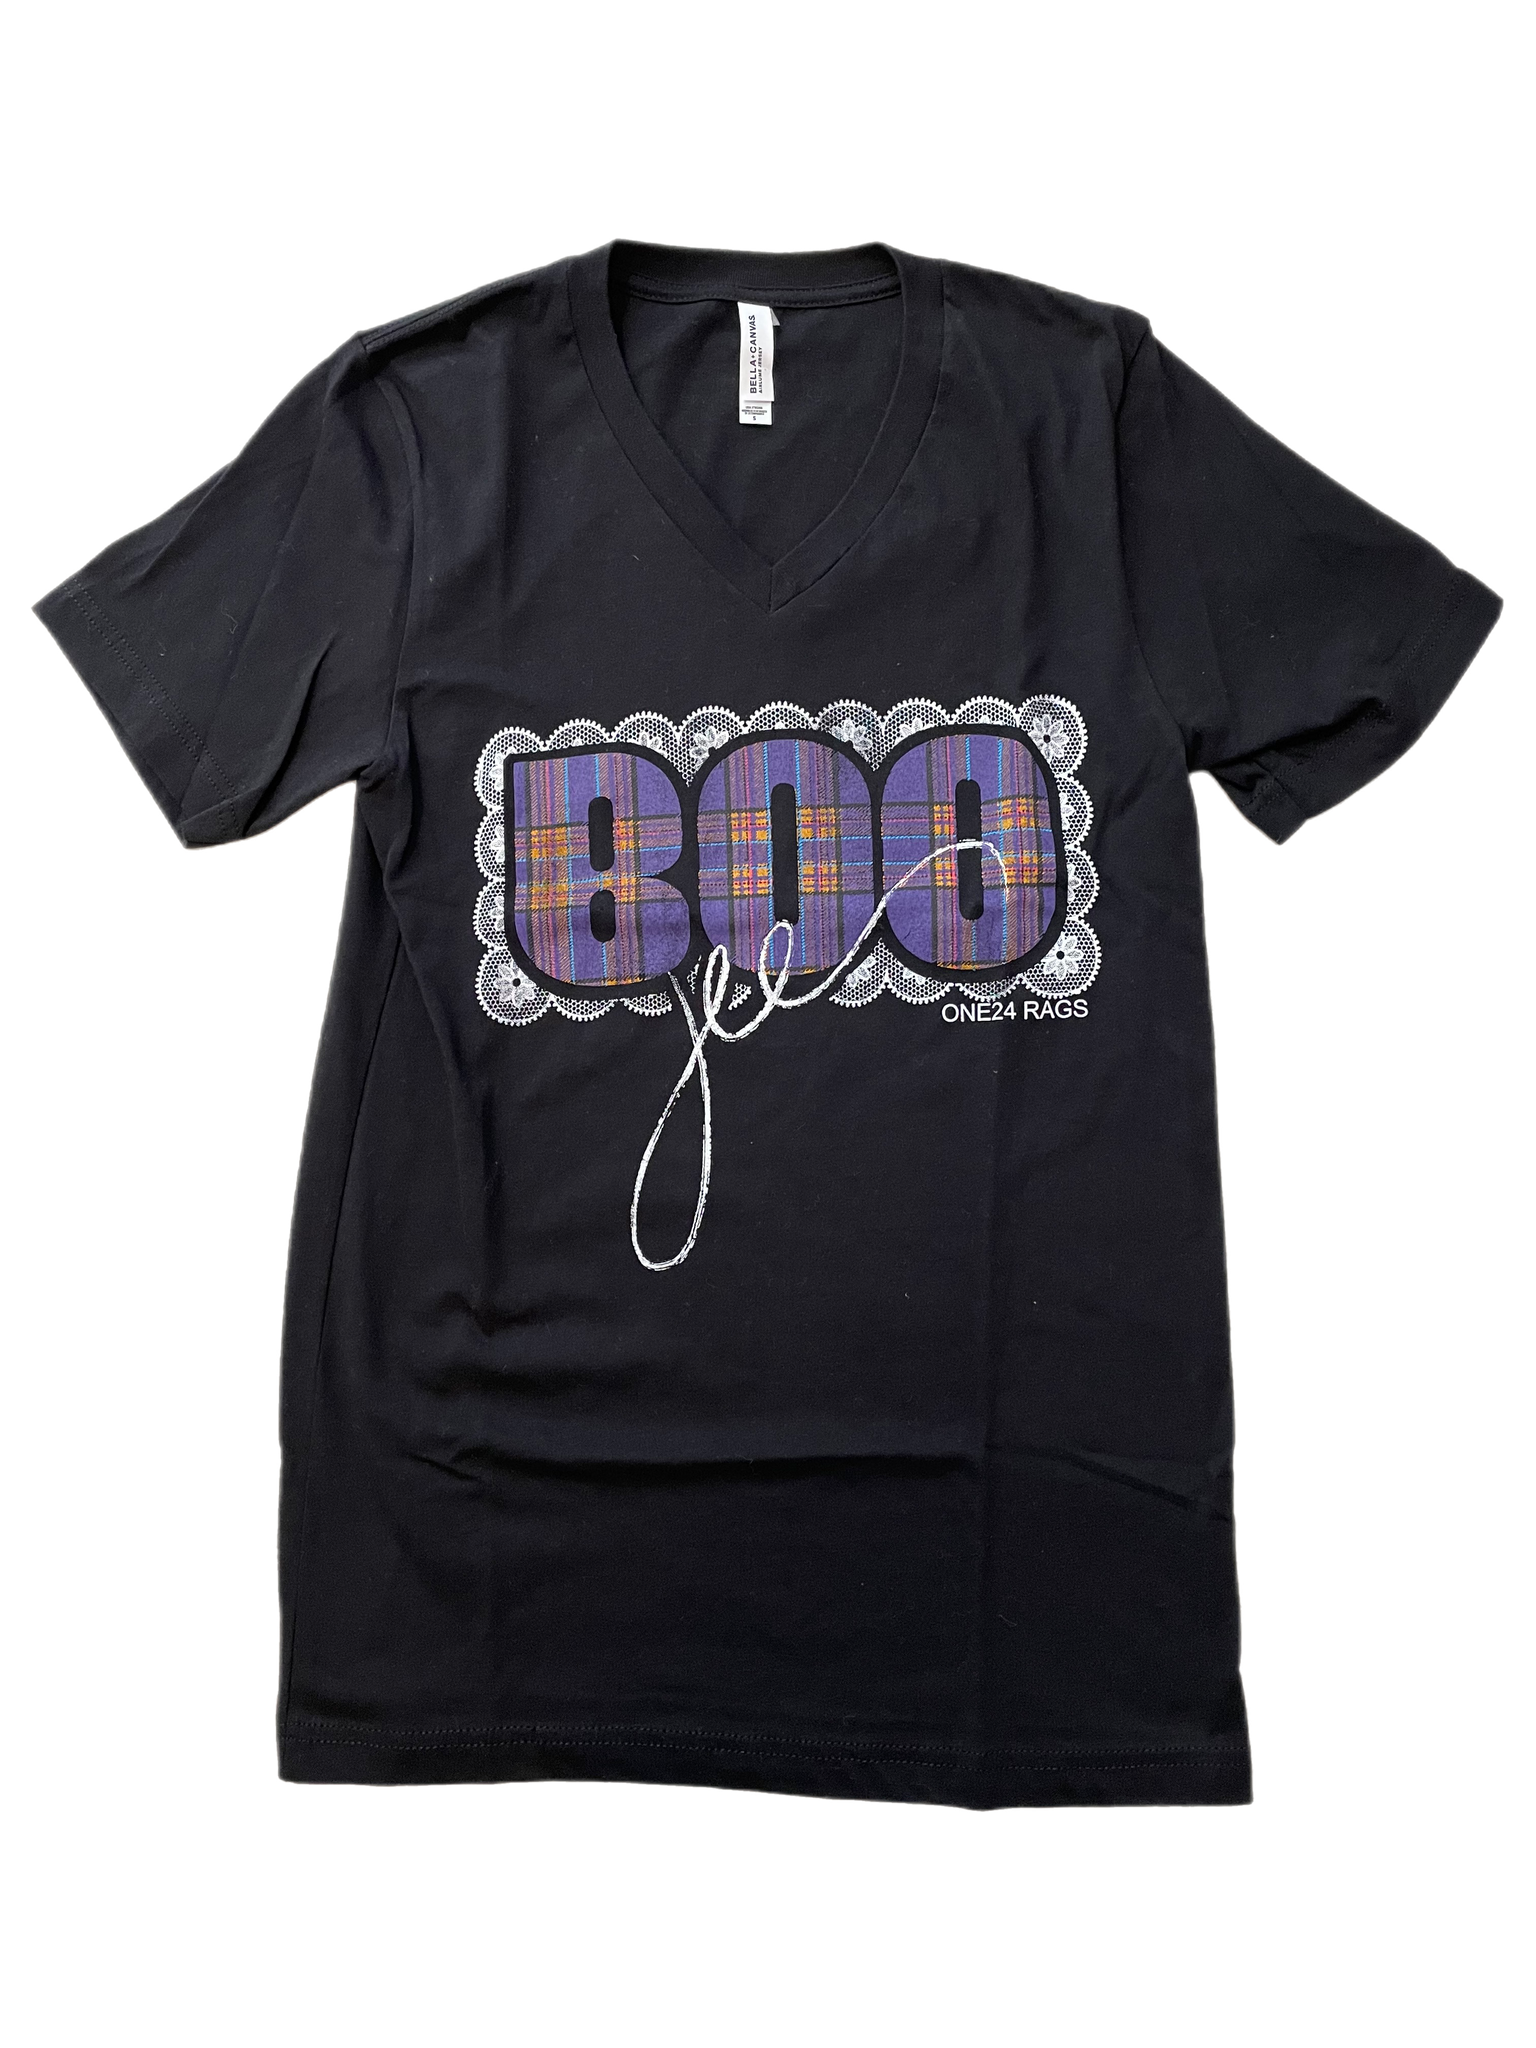 One 24 Rags Boojee Tee-Clothing-Sunshine and Wine Boutique